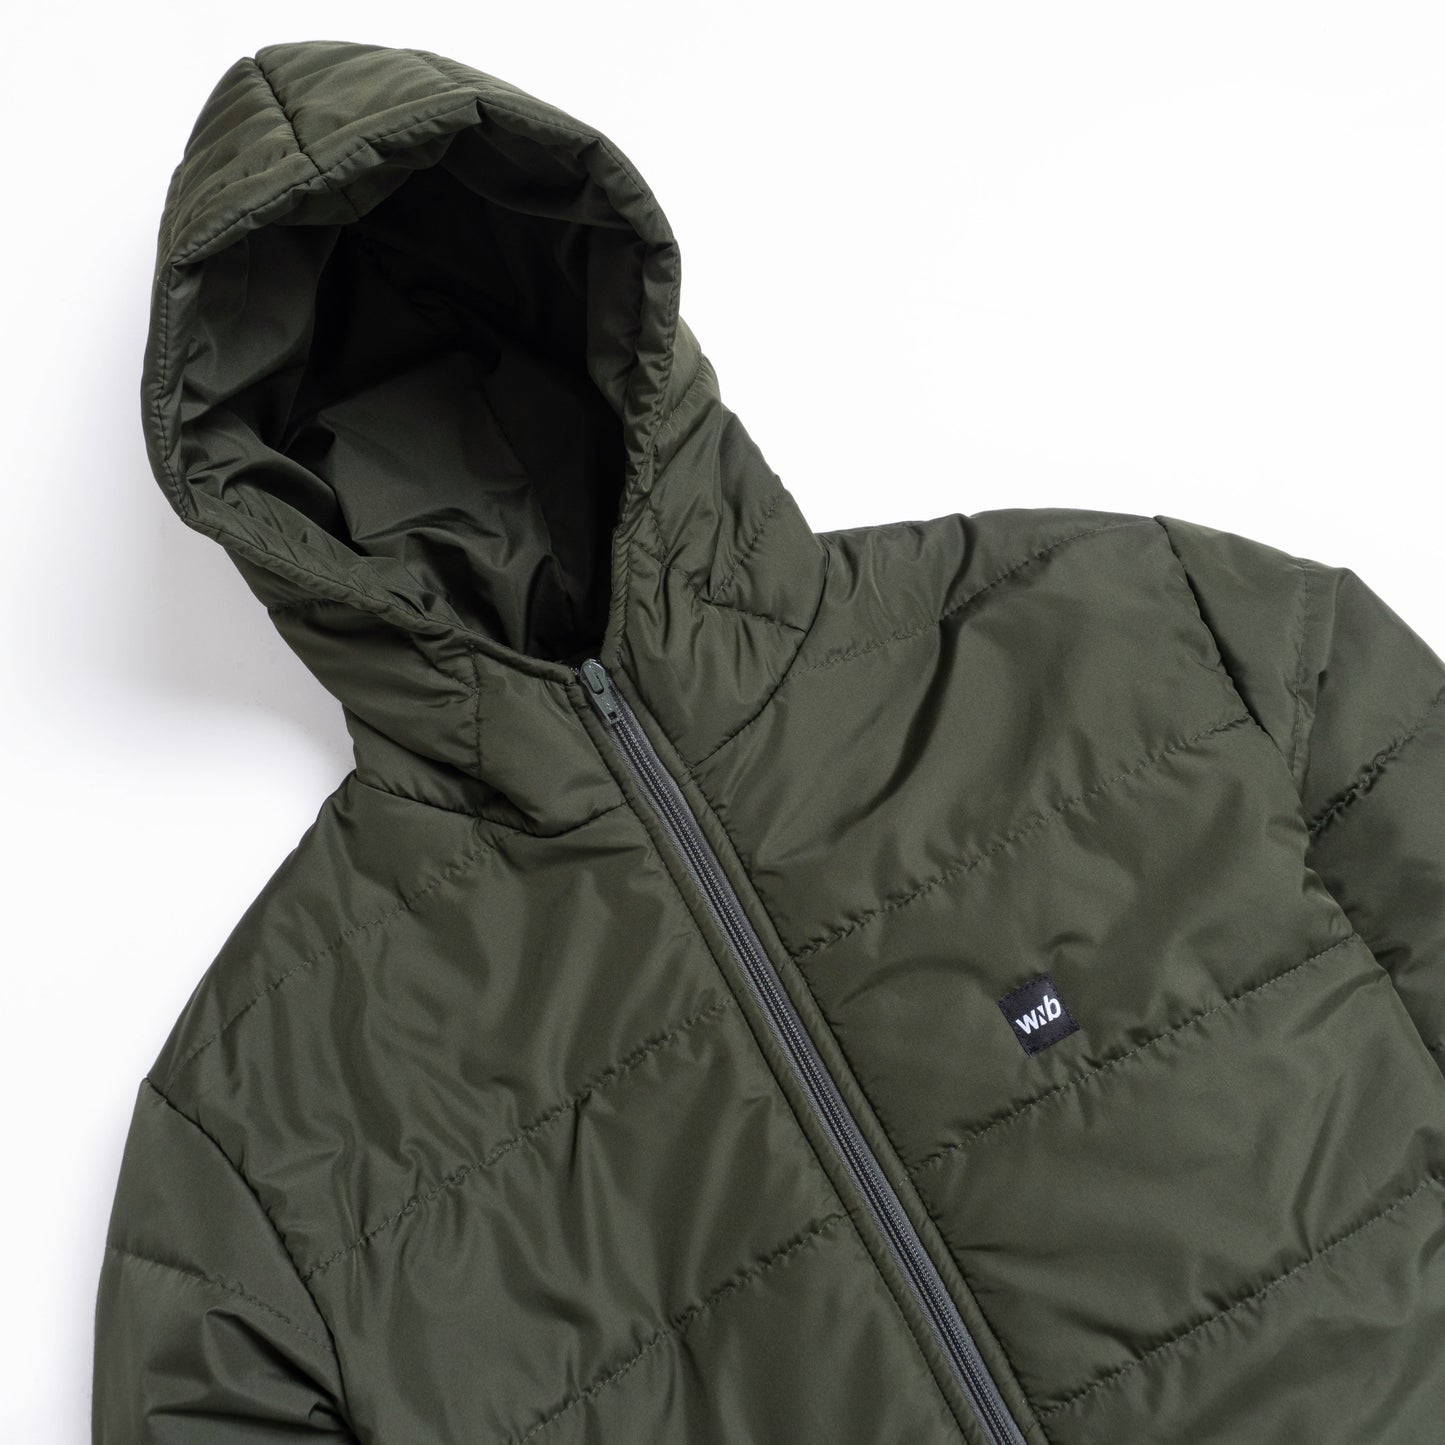 LUNE PUFFER JACKET OLIVE GREEN